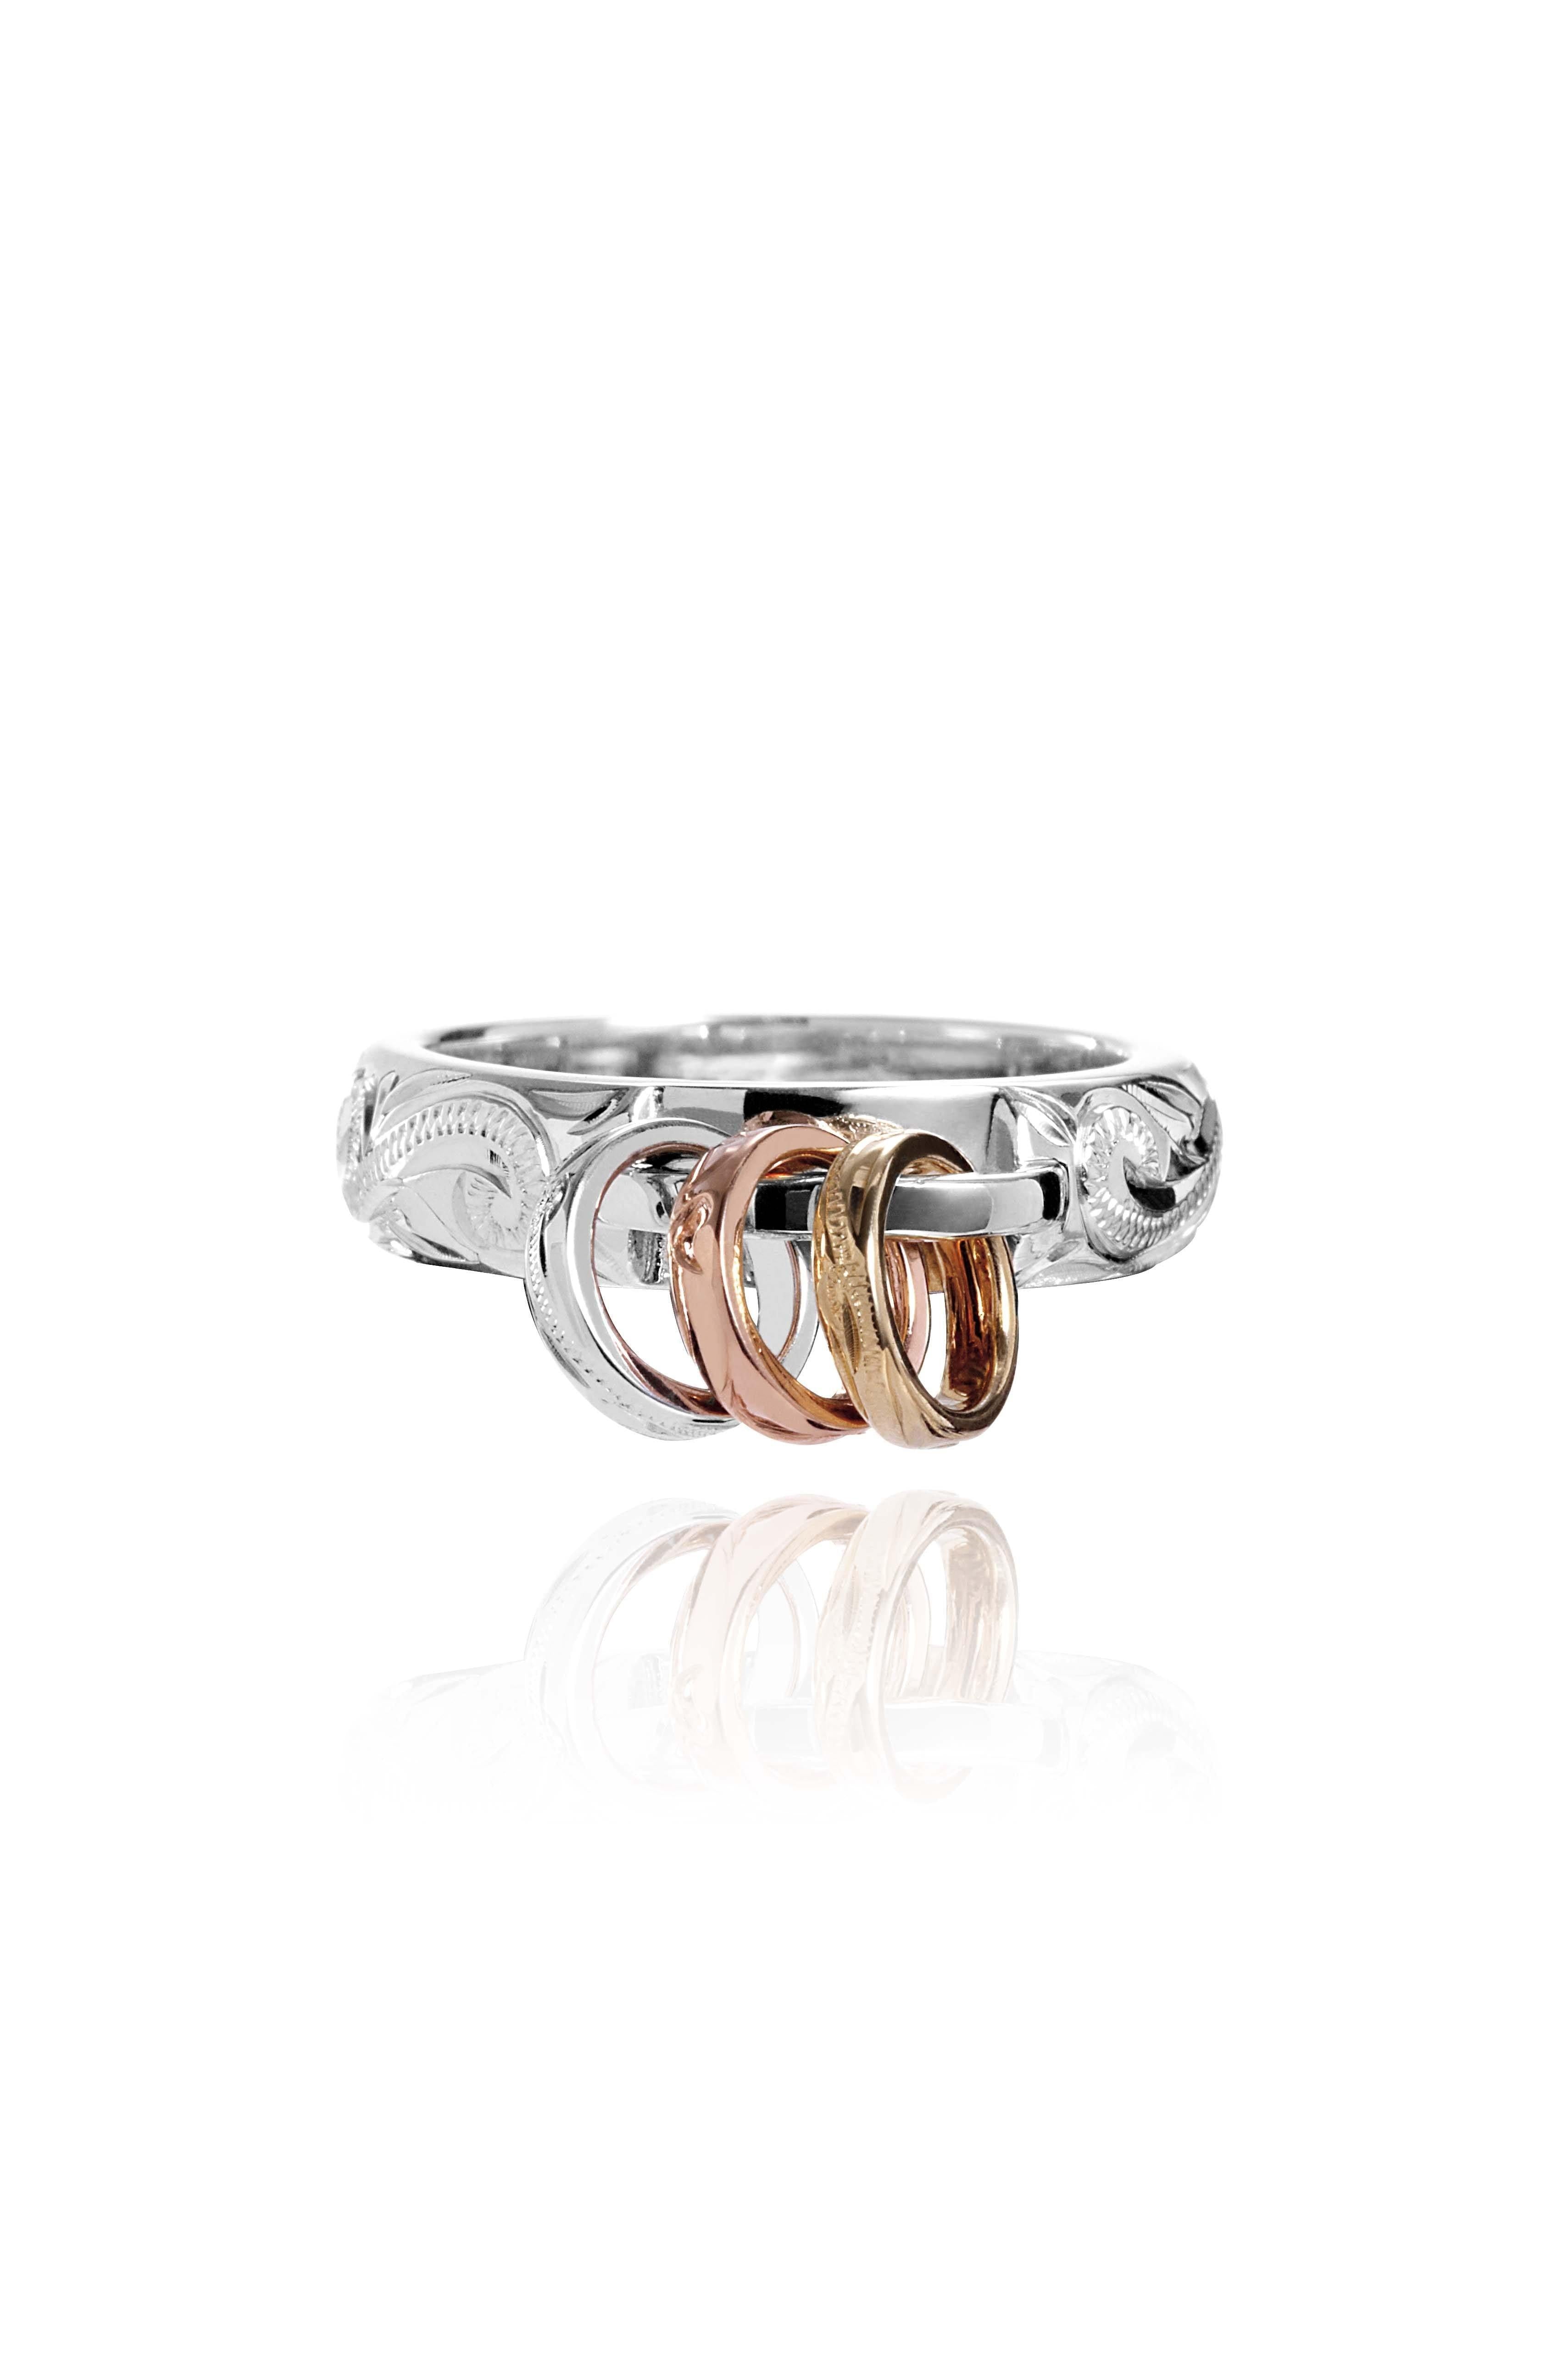 The picture shows a 14K white, yellow, and rose gold mini hoop tri-color ring.